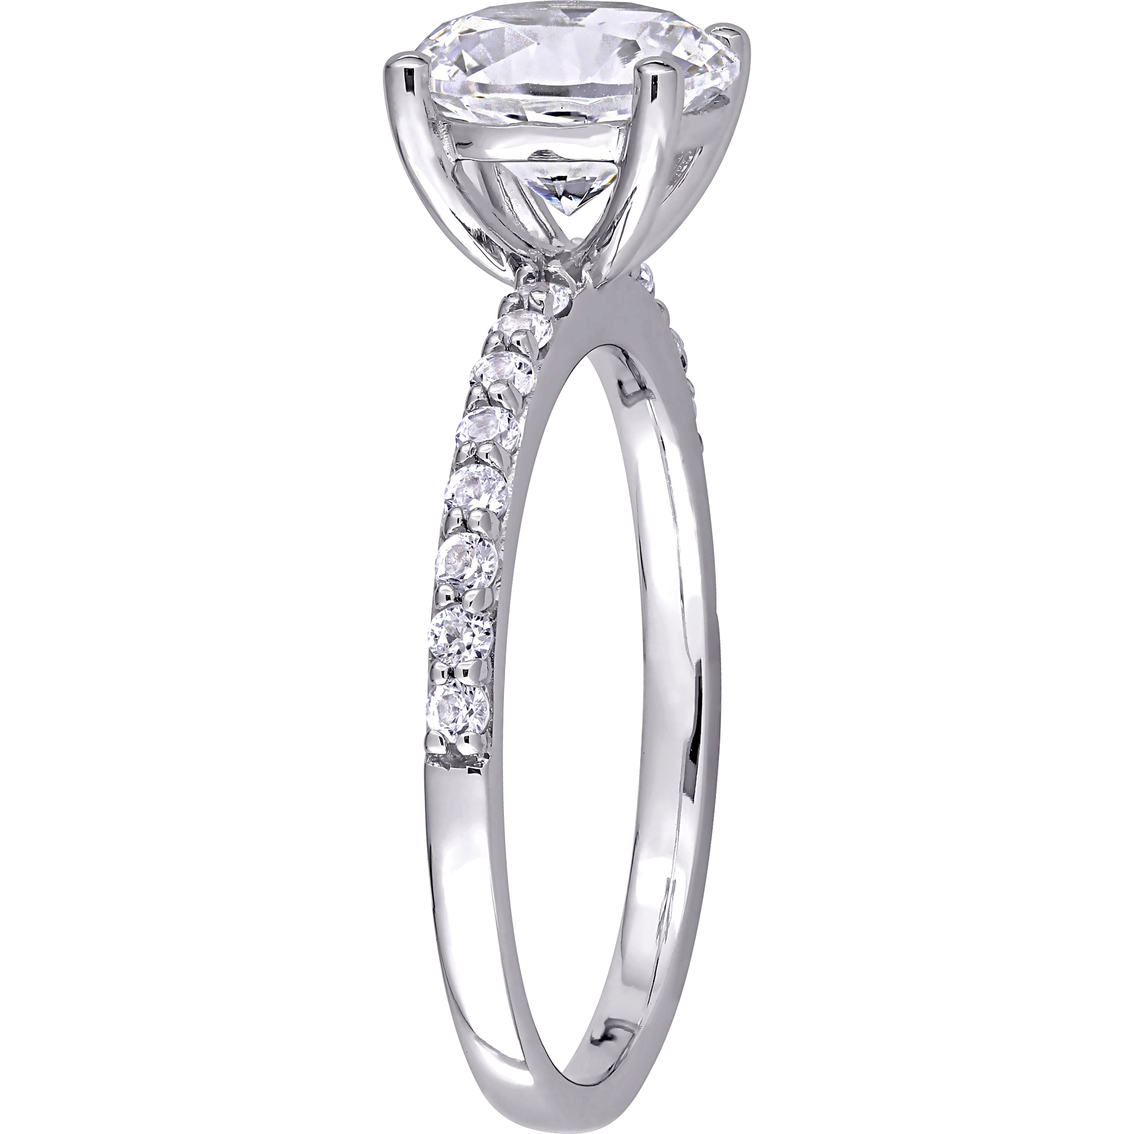 10K White Gold 2 3/4 CTW Created White Sapphire Solitaire Ring Size 7 - Image 2 of 4